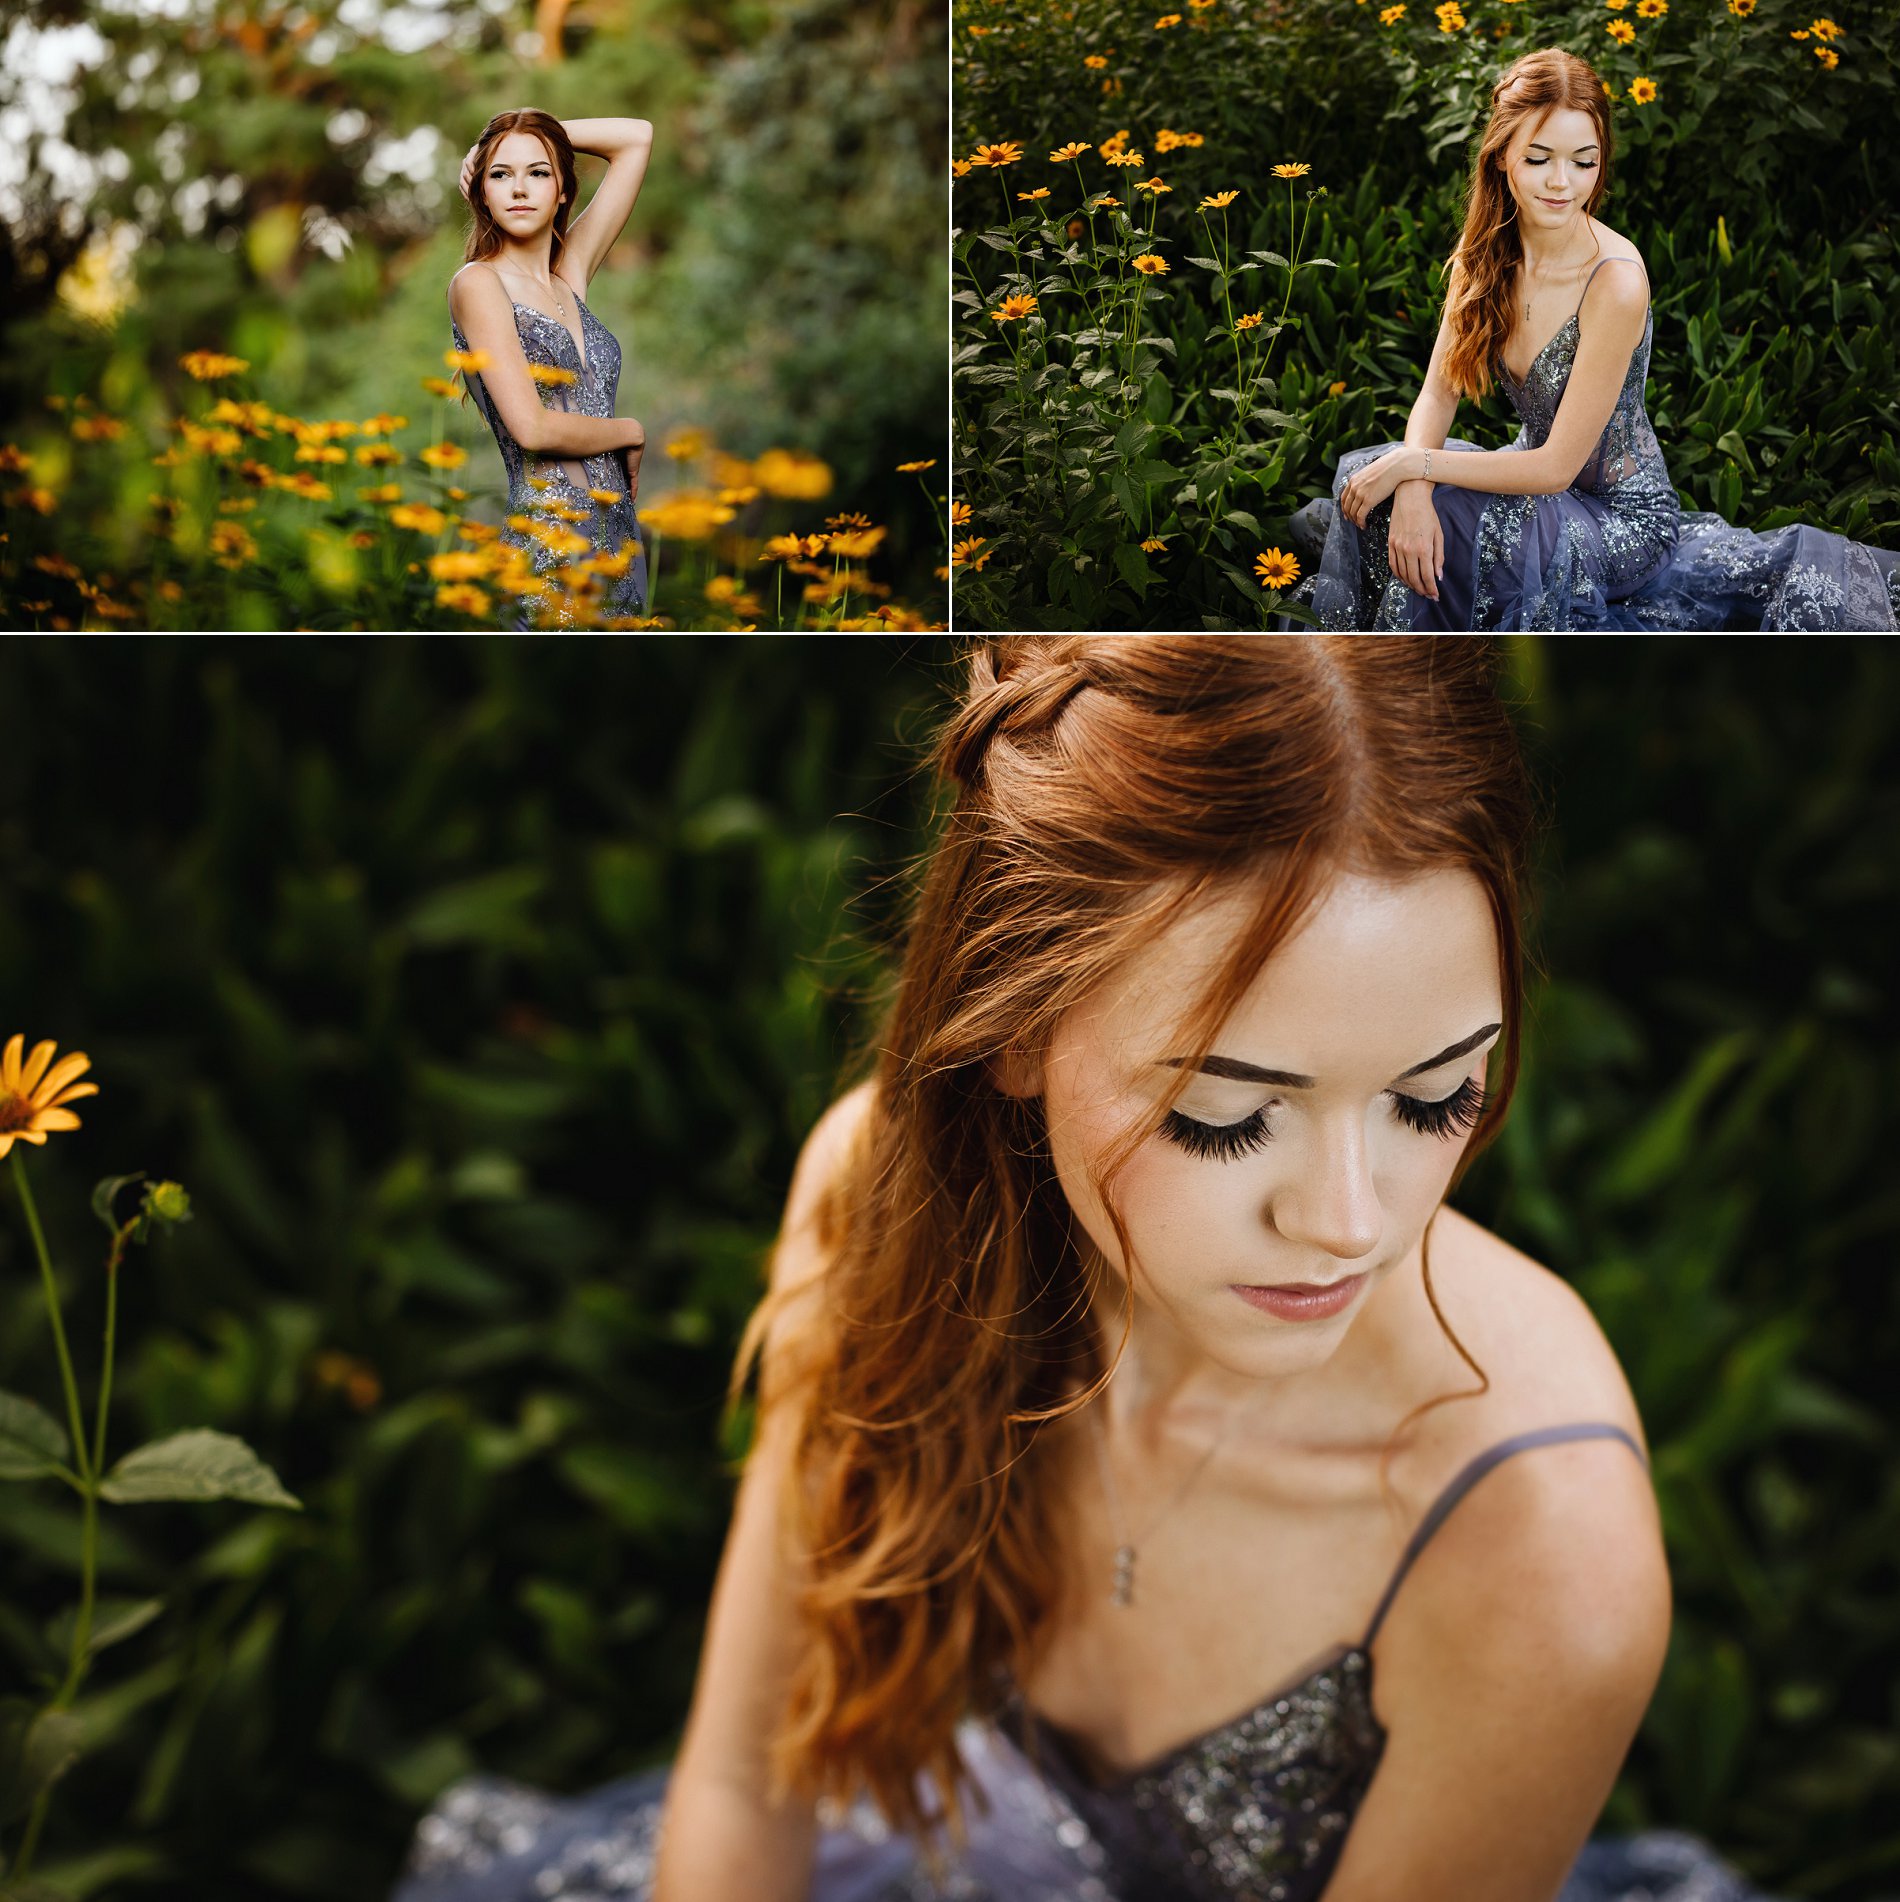 Graduation portraits in a colorful garden of yellow flowers